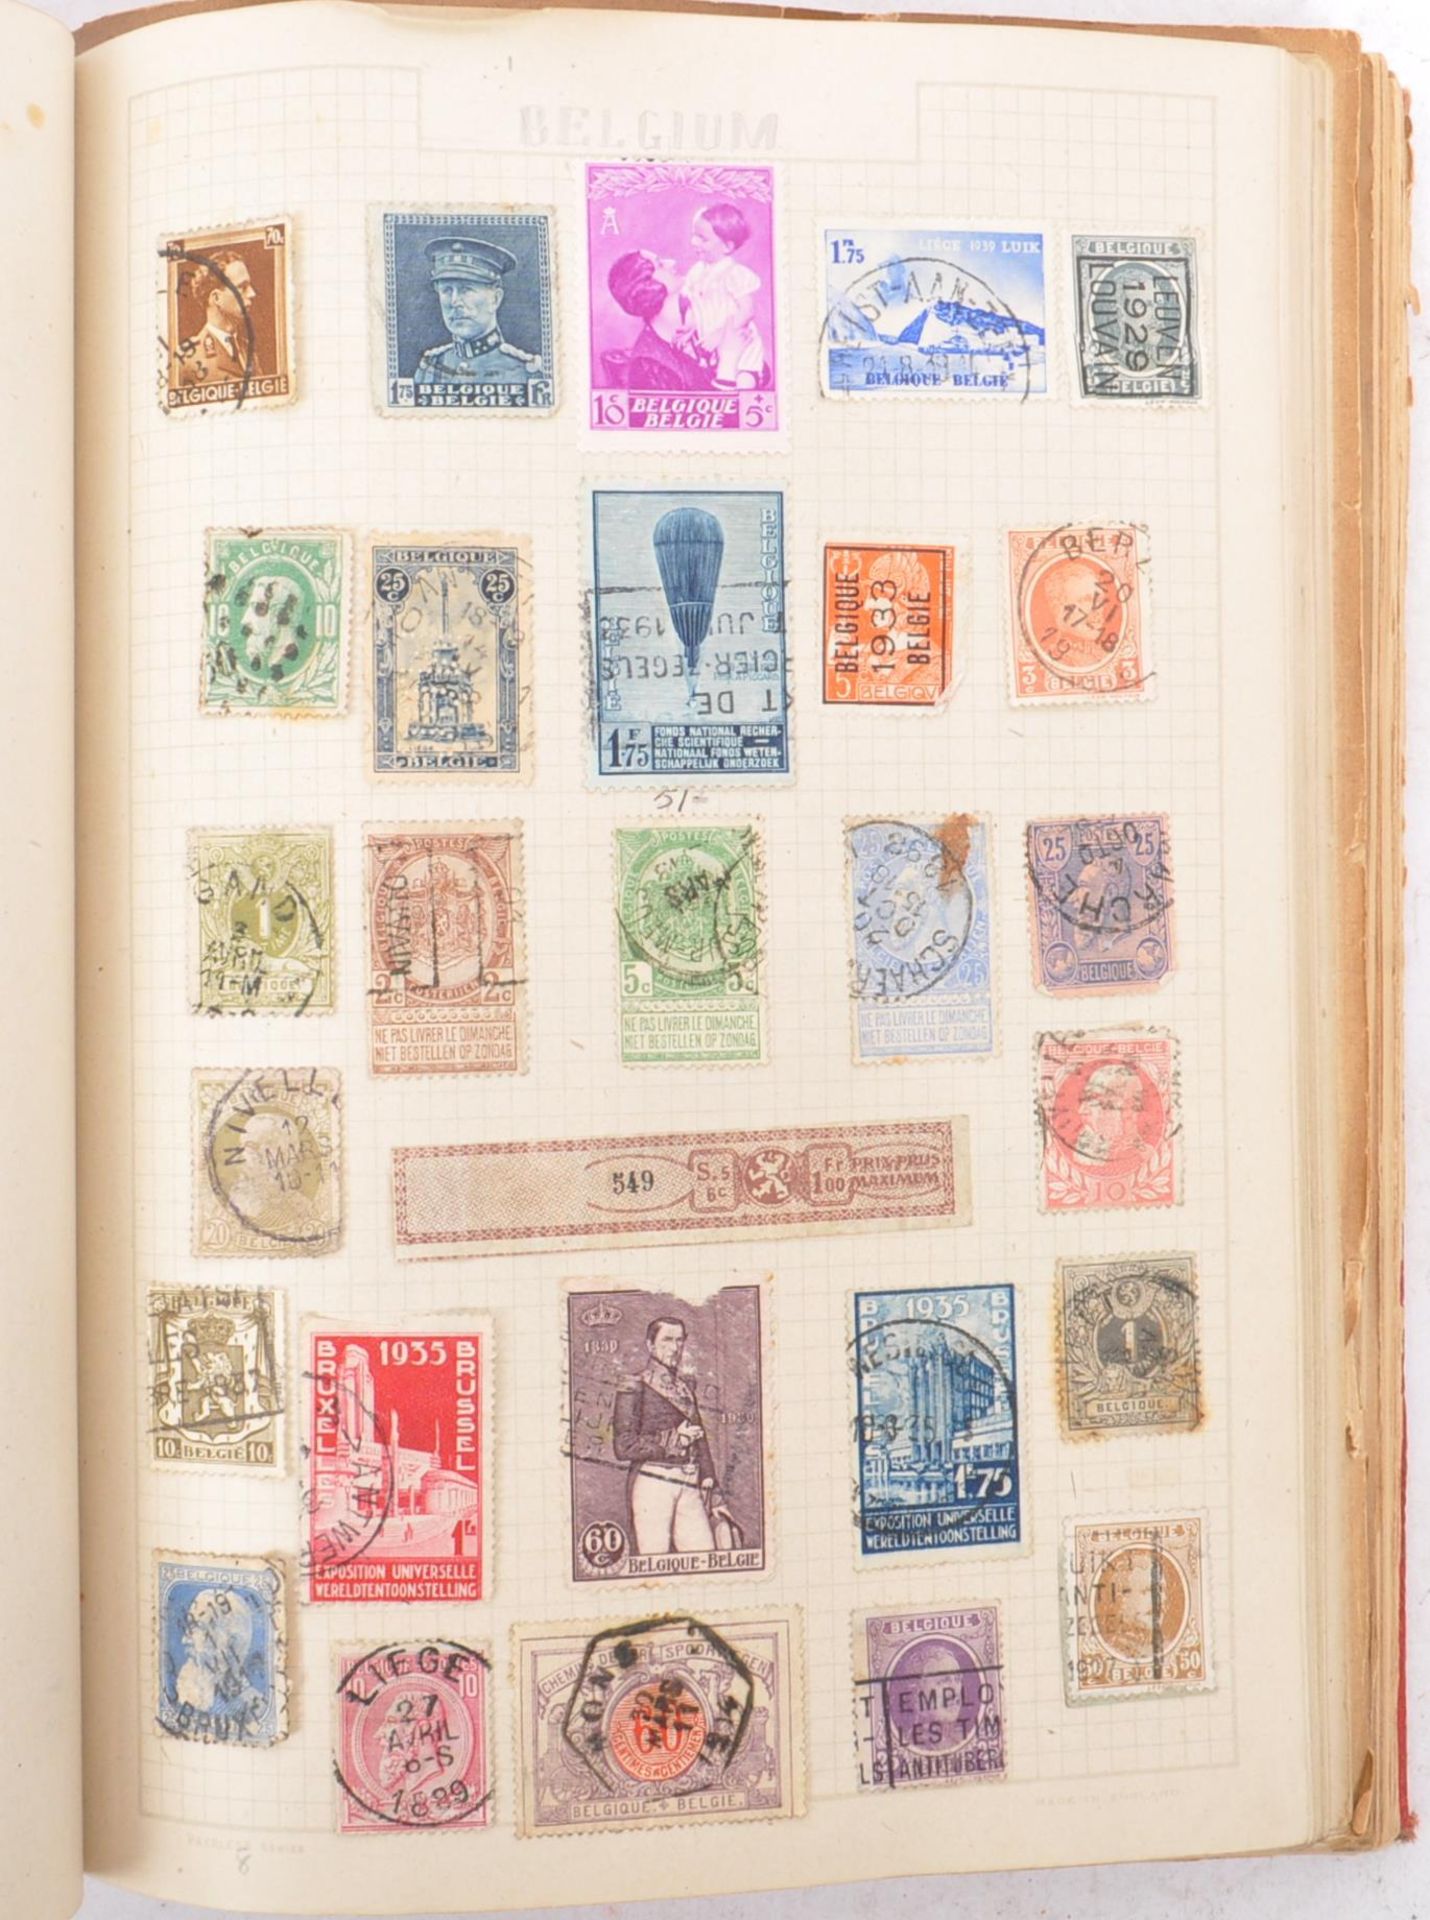 19TH & 20TH CENTURY BRITISH & FOREIGN POSTAGE STAMPS - Image 5 of 6